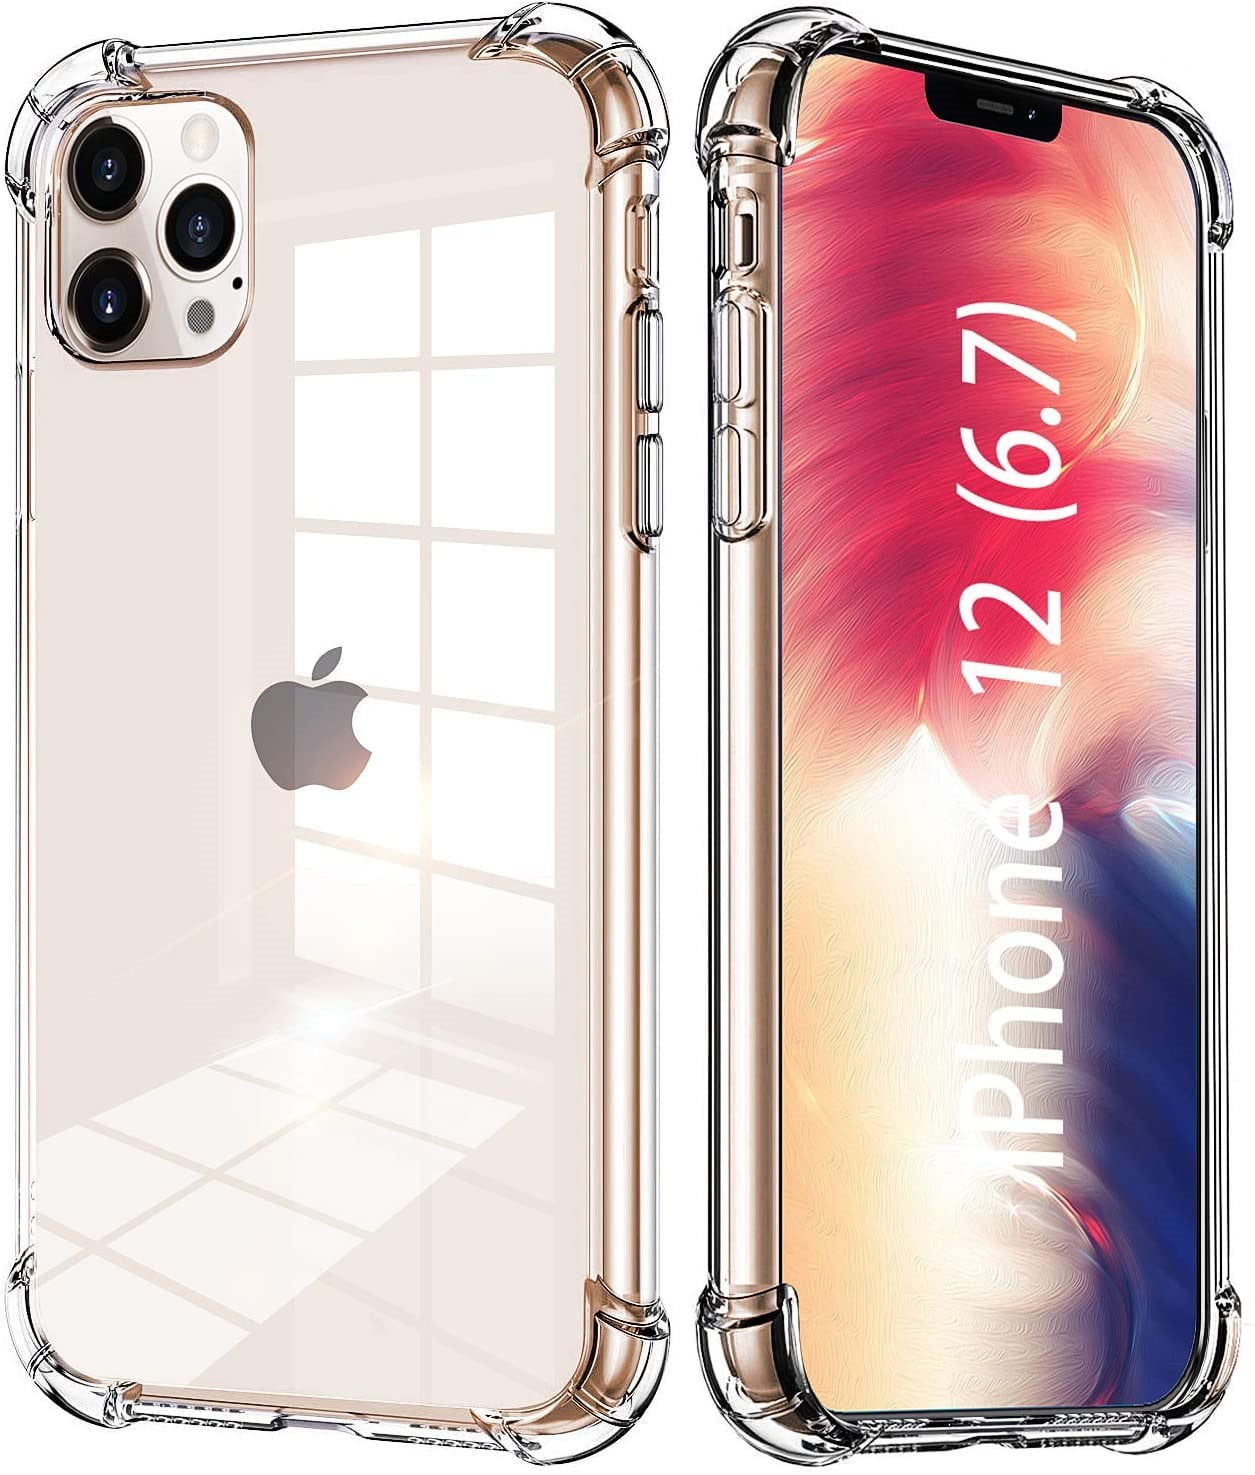 CAFELE Crystal Clear Compatible with iPhone 12 Pro Max Case 6.7 Inch, Anti-Yellowing Soft TPU Slim Fit Silicon Case Replacement for iPhone 12 Pro Max-Clear